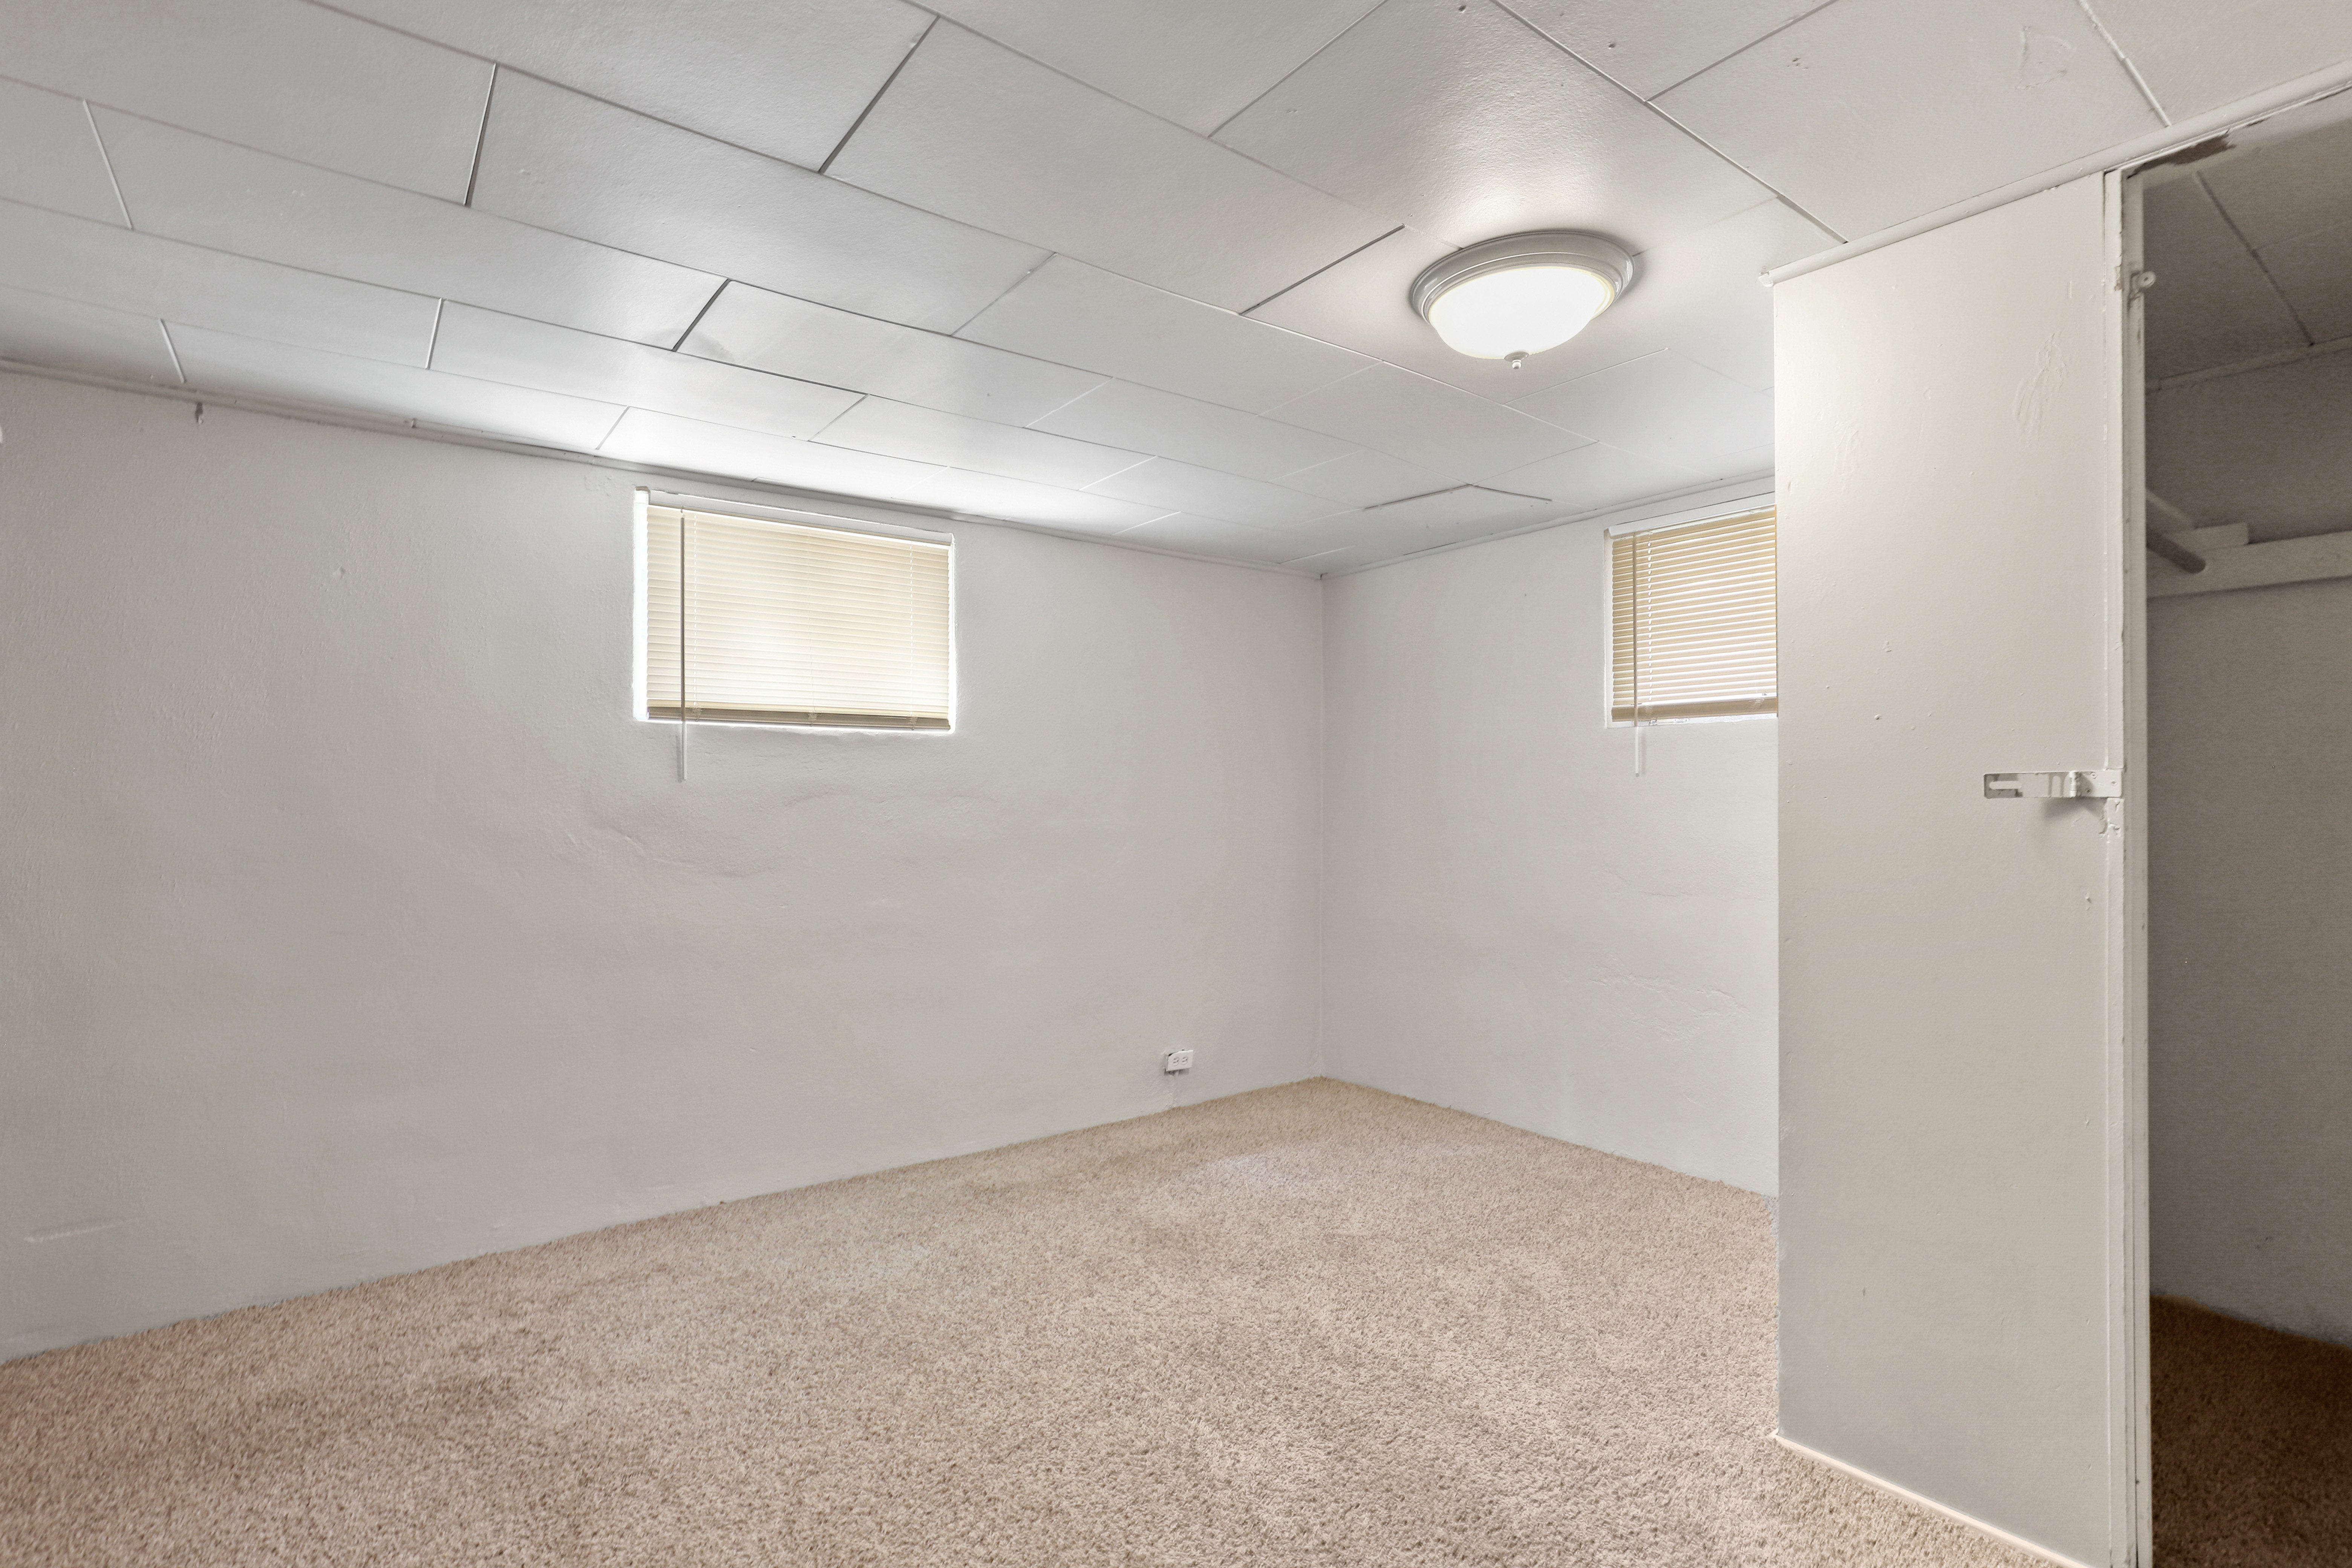 the interior of an empty room with a door and a window